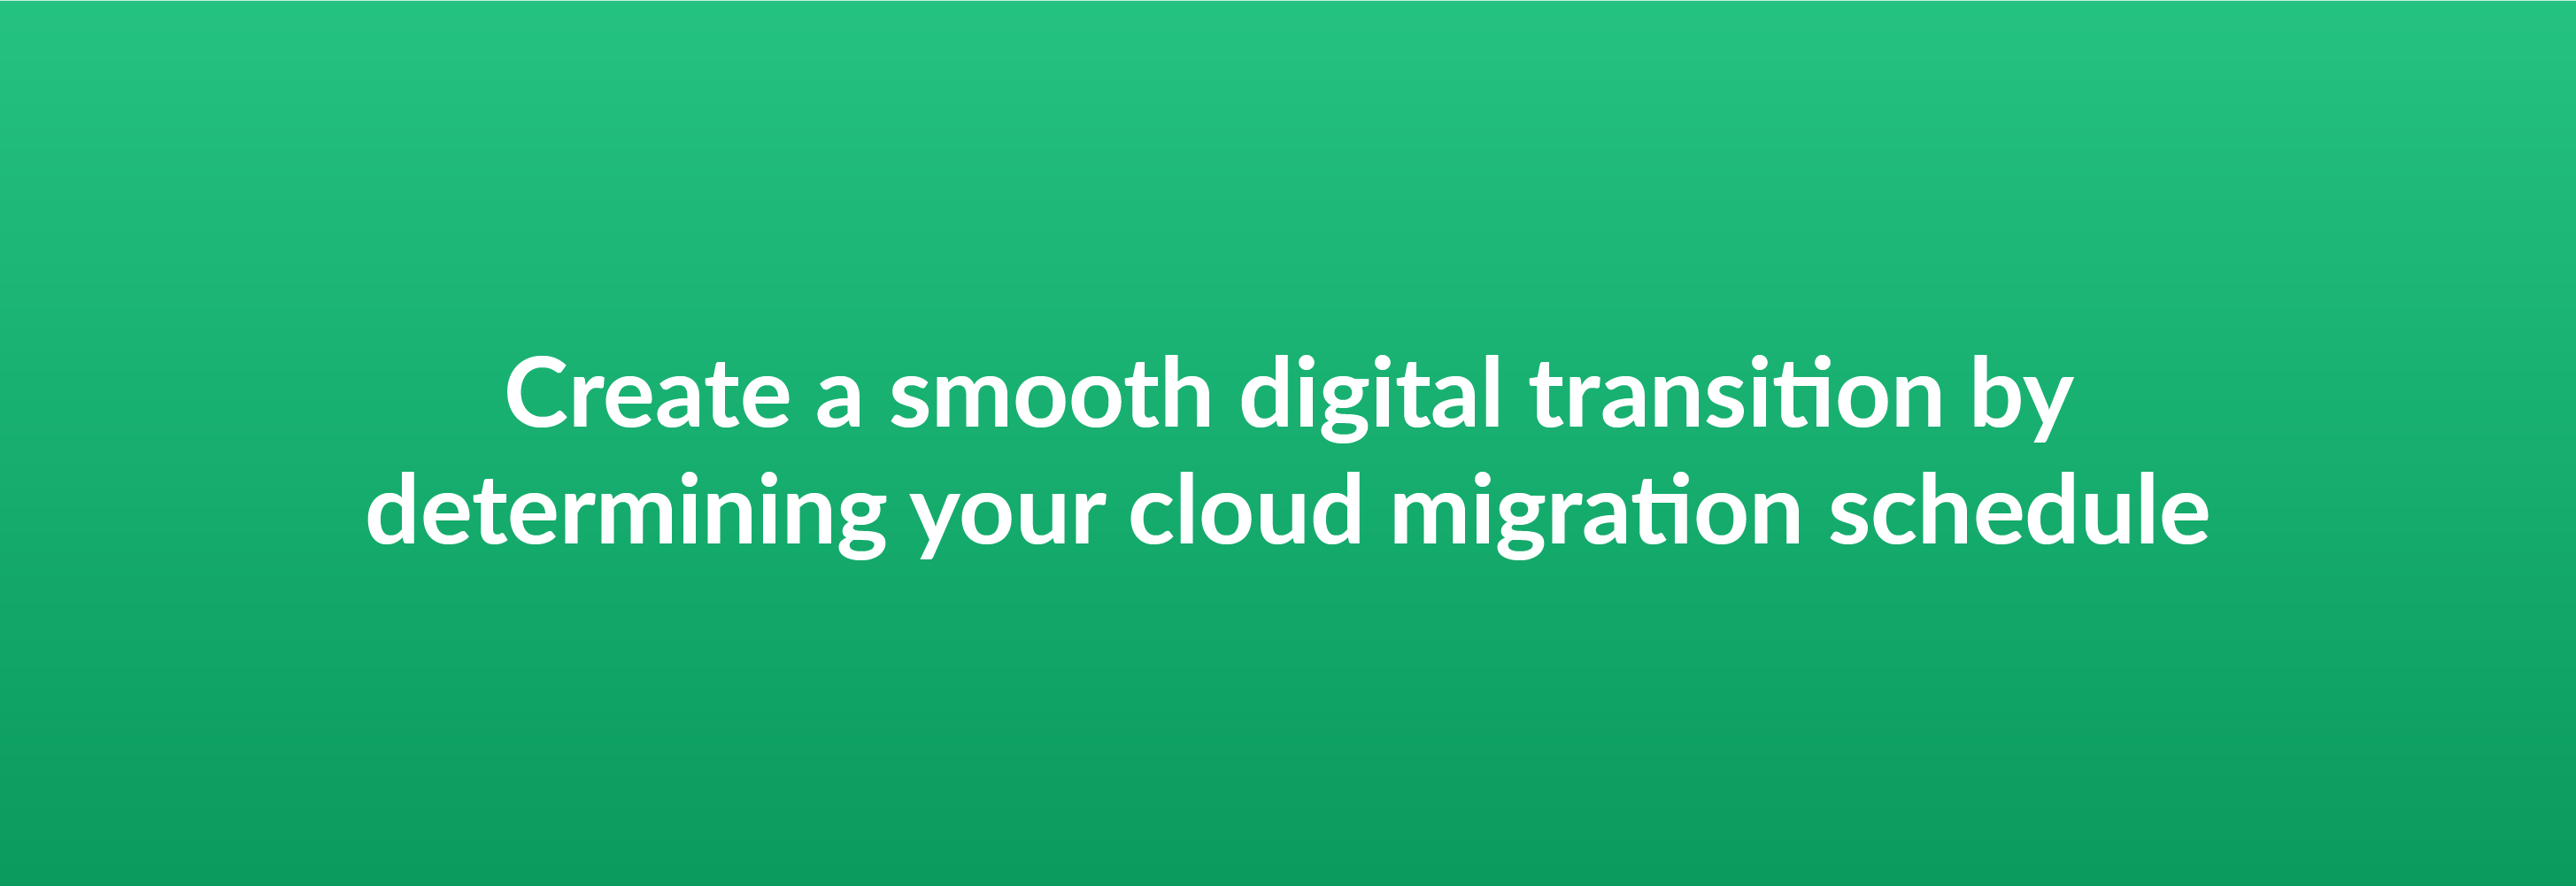 Create a smooth digital transition by determing your cloud migration schedule